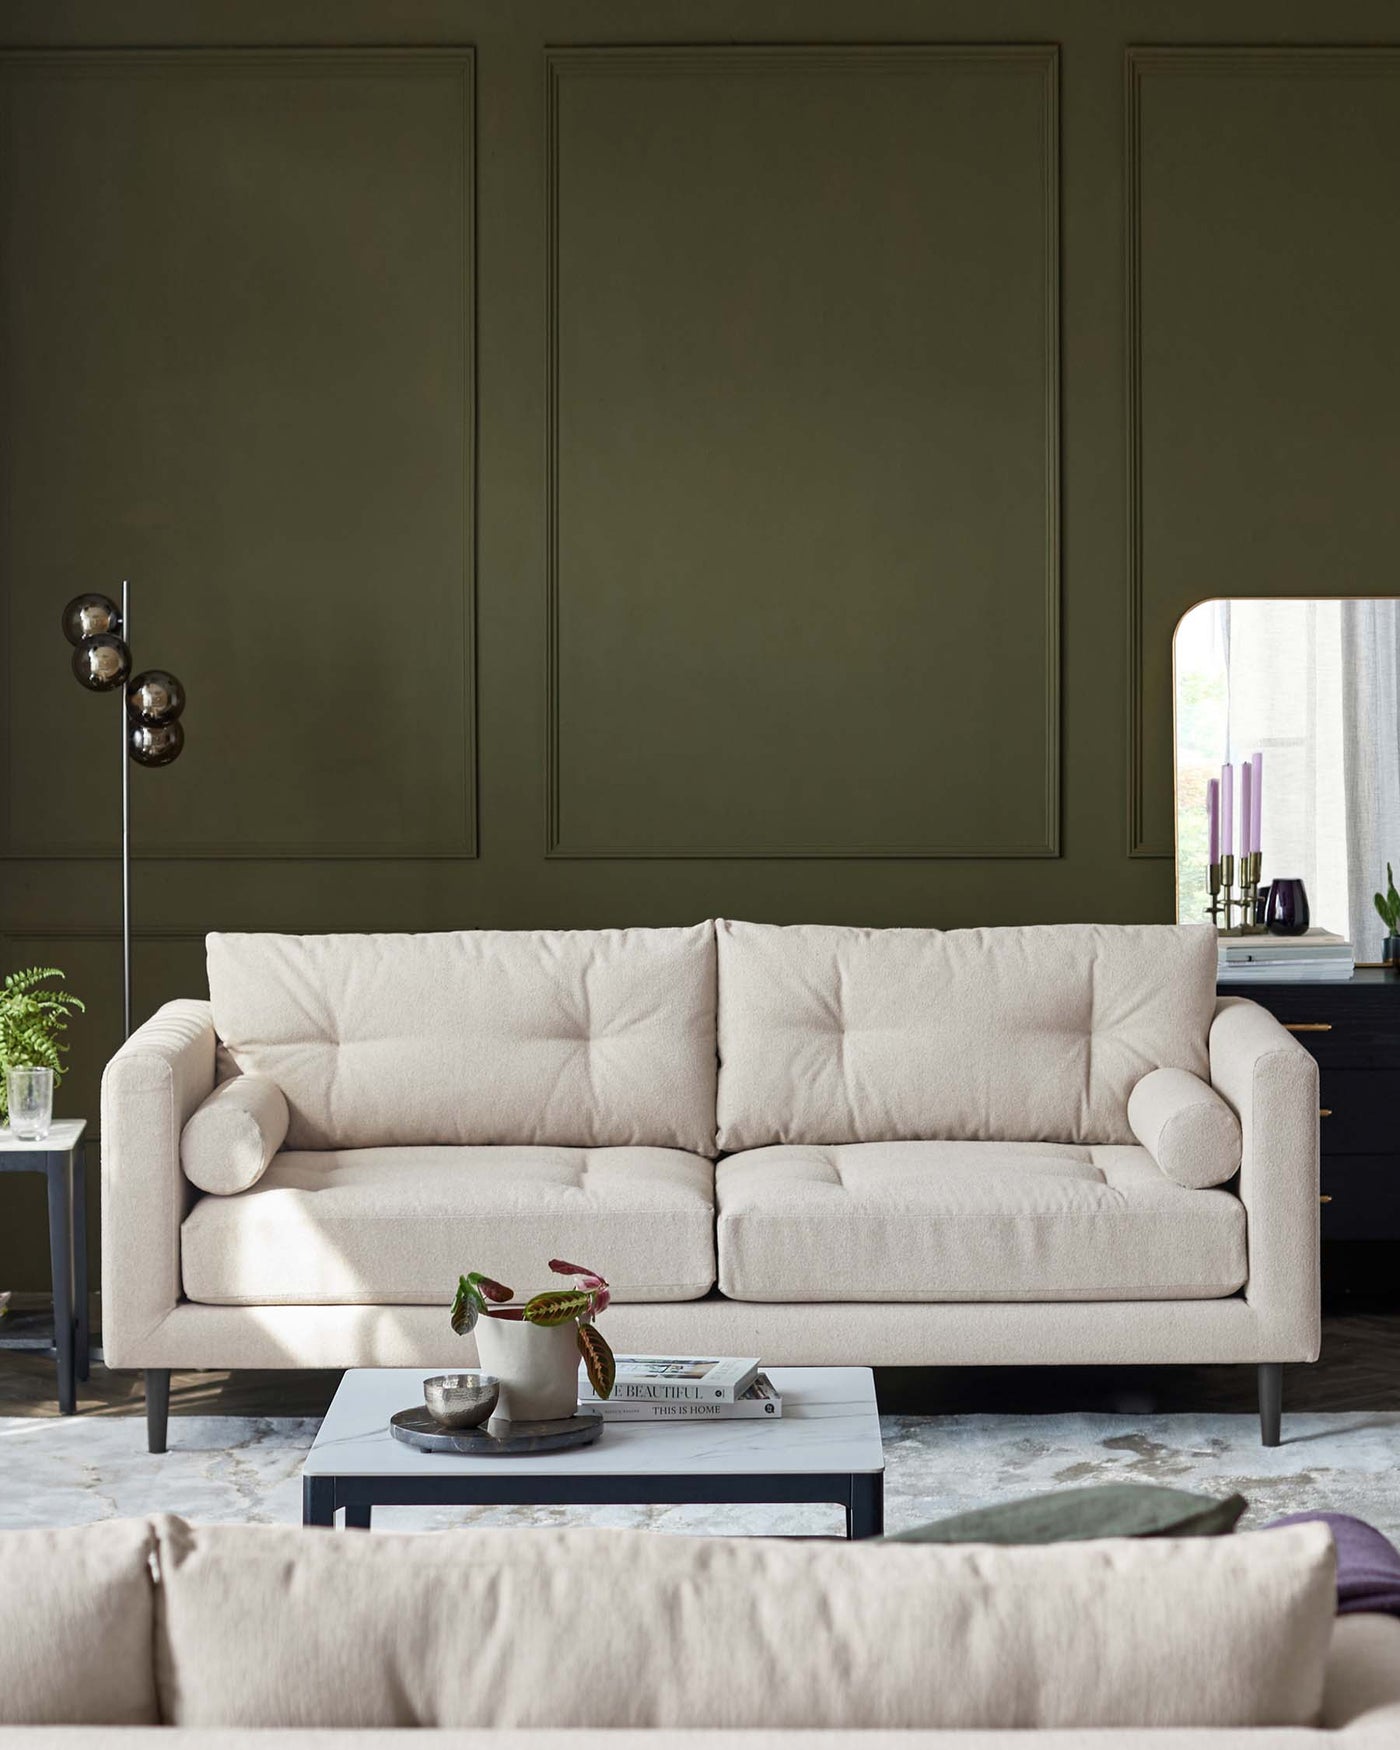 A contemporary beige three-seater sofa with plush cushions and a cylindrical bolster pillow on one side, featuring minimalist wooden legs and subtly rolled armrests, is positioned in front of a muted green wall with decorative panelling. The sofa is complemented by a low-profile grey rectangular coffee table with a book and a small tray containing a decorative plant and candle, all atop a patterned area rug. A modern floor lamp with a metallic finish and spherical shades stands to the left.